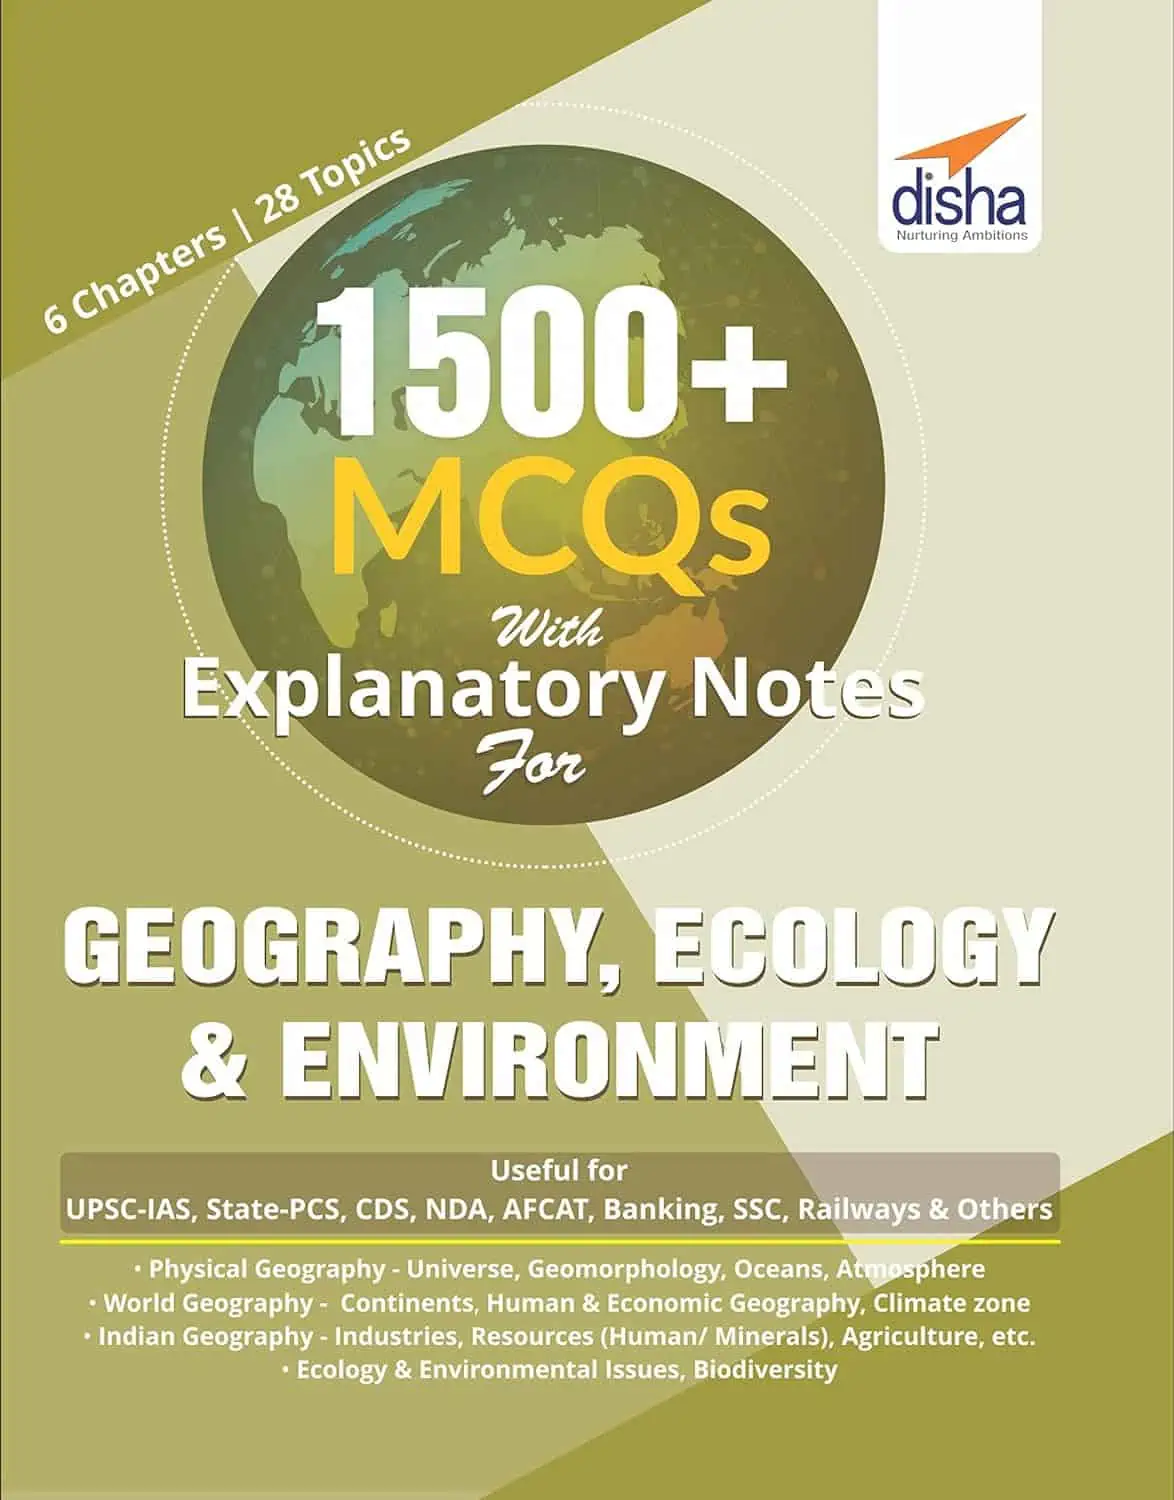 Disha 1500+ Geography, Ecology & Environment MCQs with Explanatory Notes Book Pdf